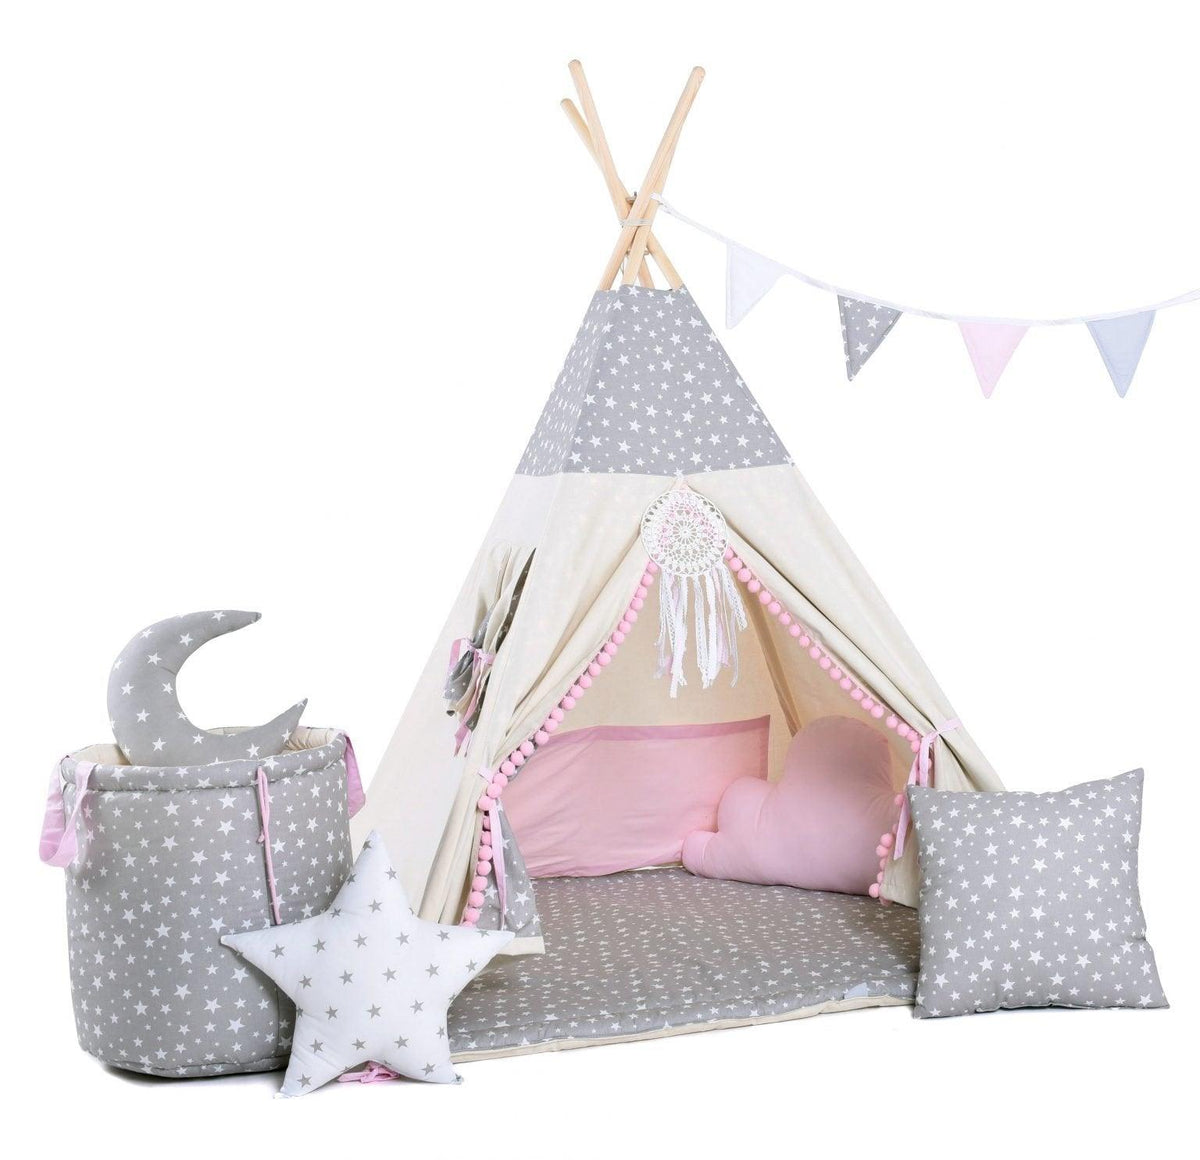 Child's Teepee Set Star Pearl - VirtuousWares:Global